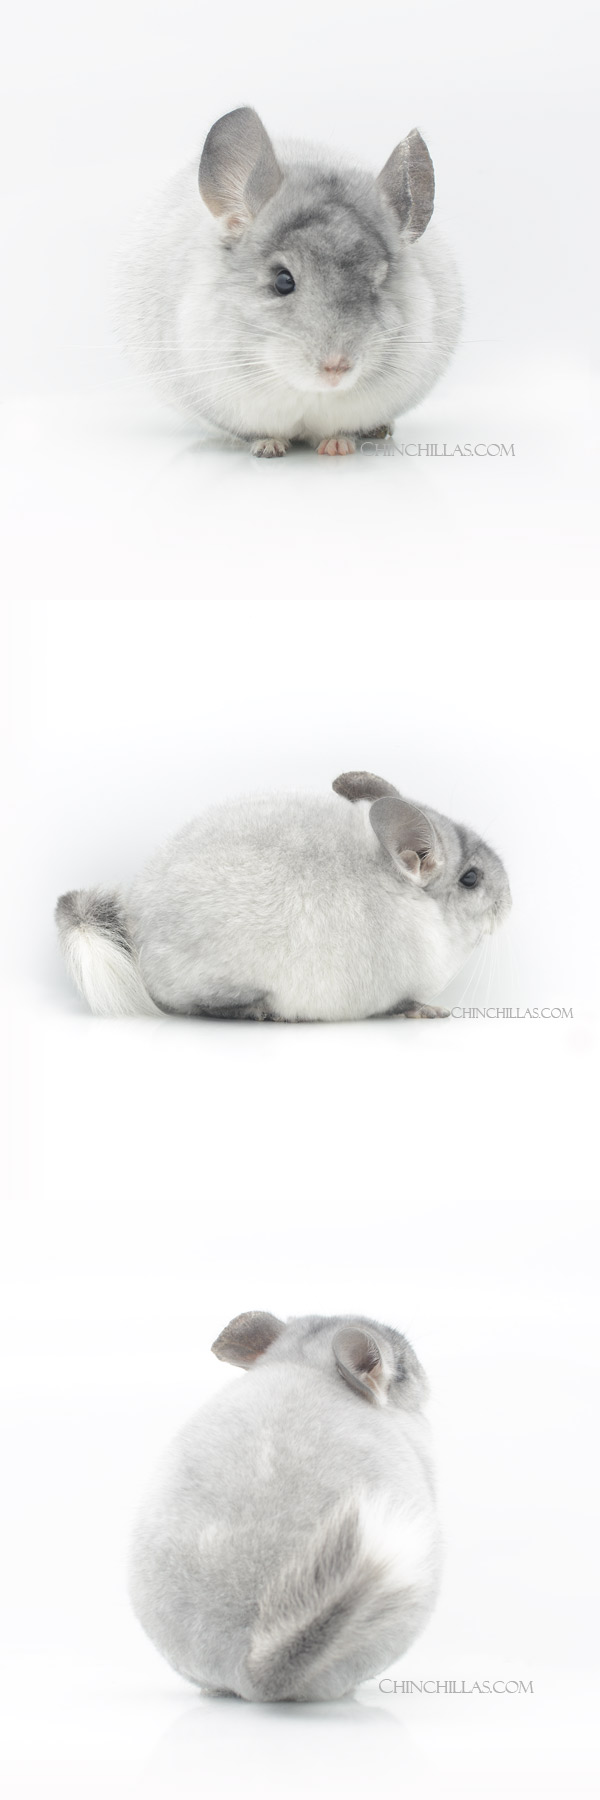 Chinchilla or related item offered for sale or export on Chinchillas.com - 000012 Show Quality Silver Mosaic Male Chinchilla